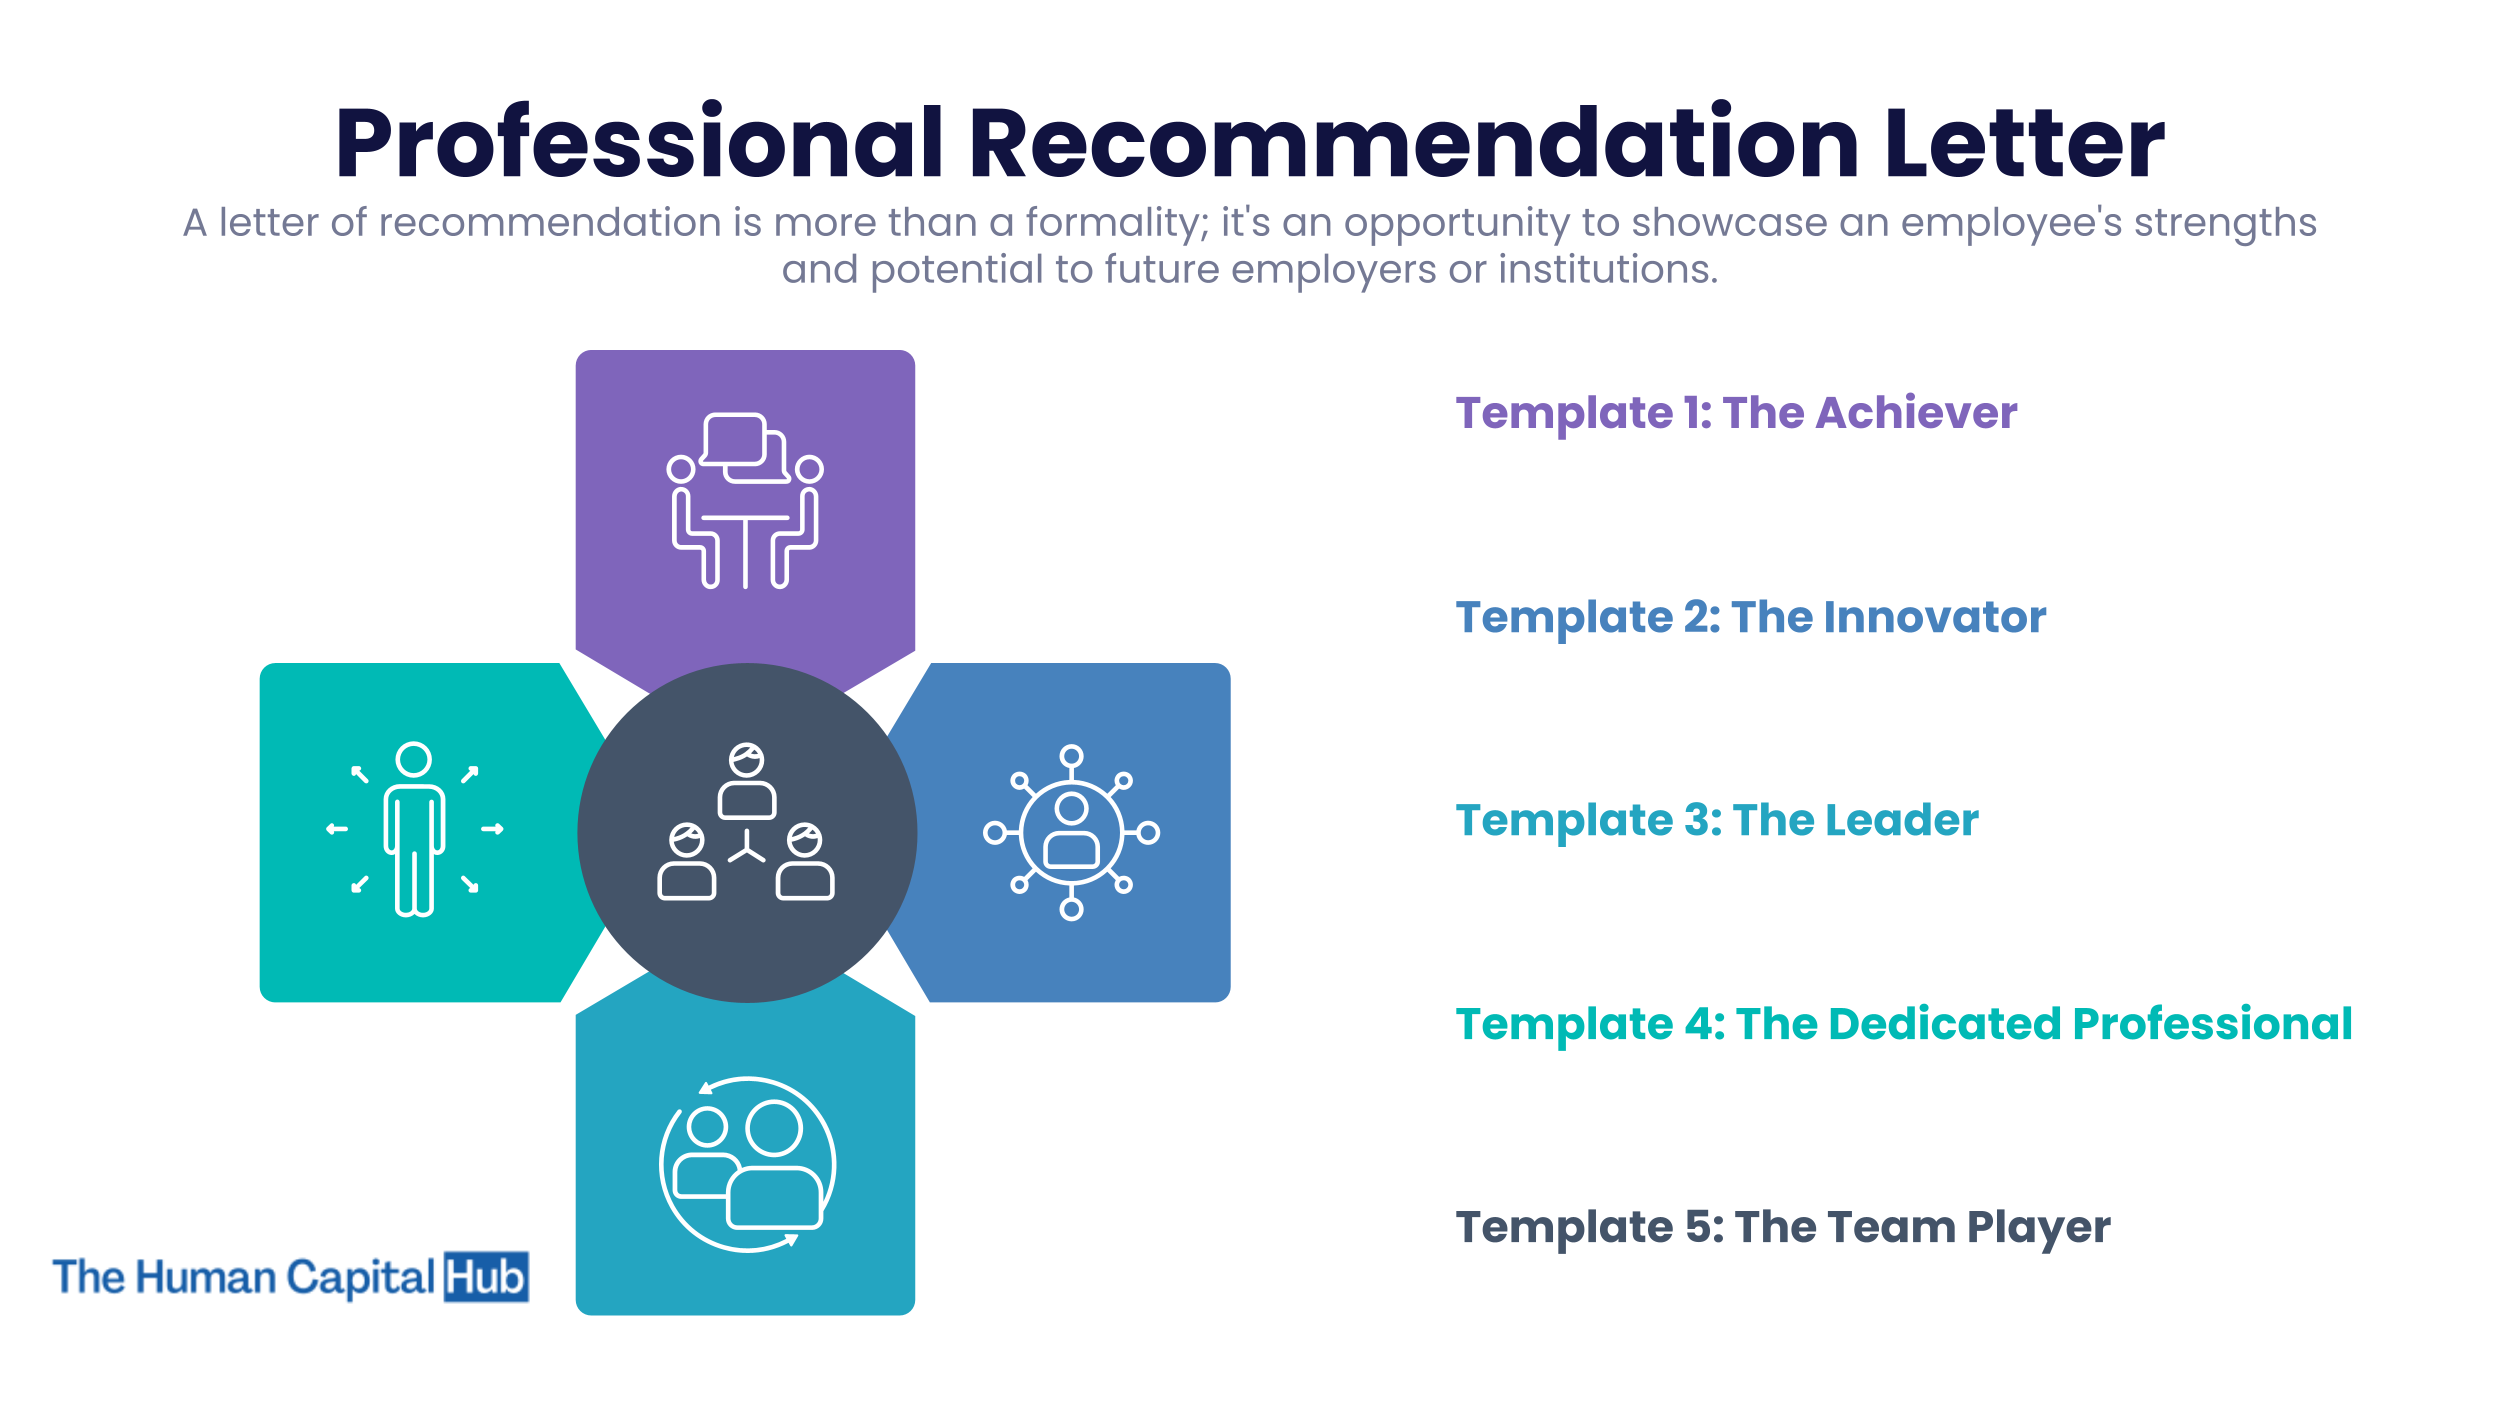 Creating The Perfect Professional Recommendation Letter: A Template for Success